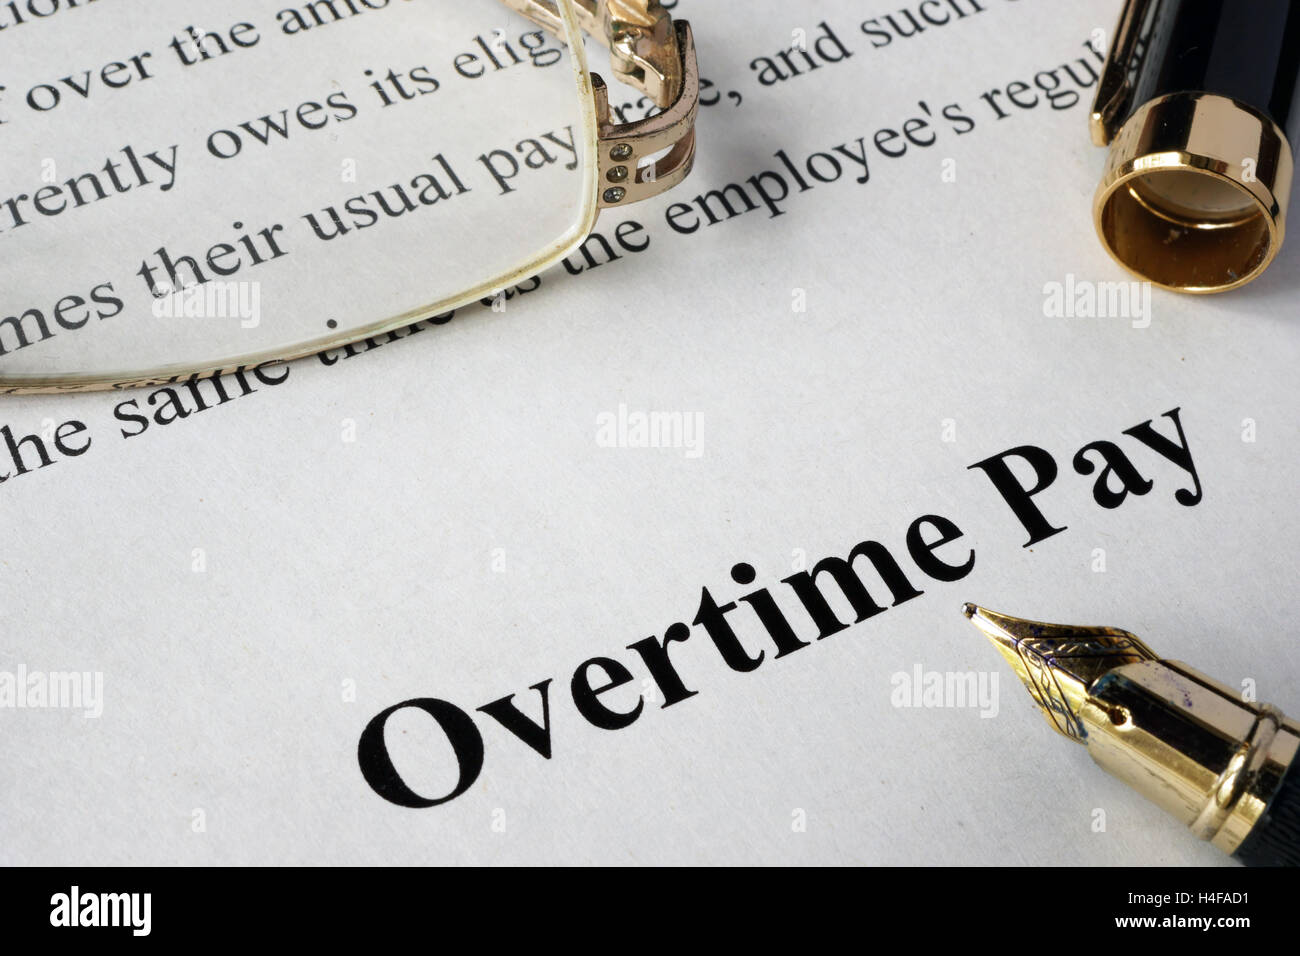 Overtime pay concept written on a paper. Stock Photo